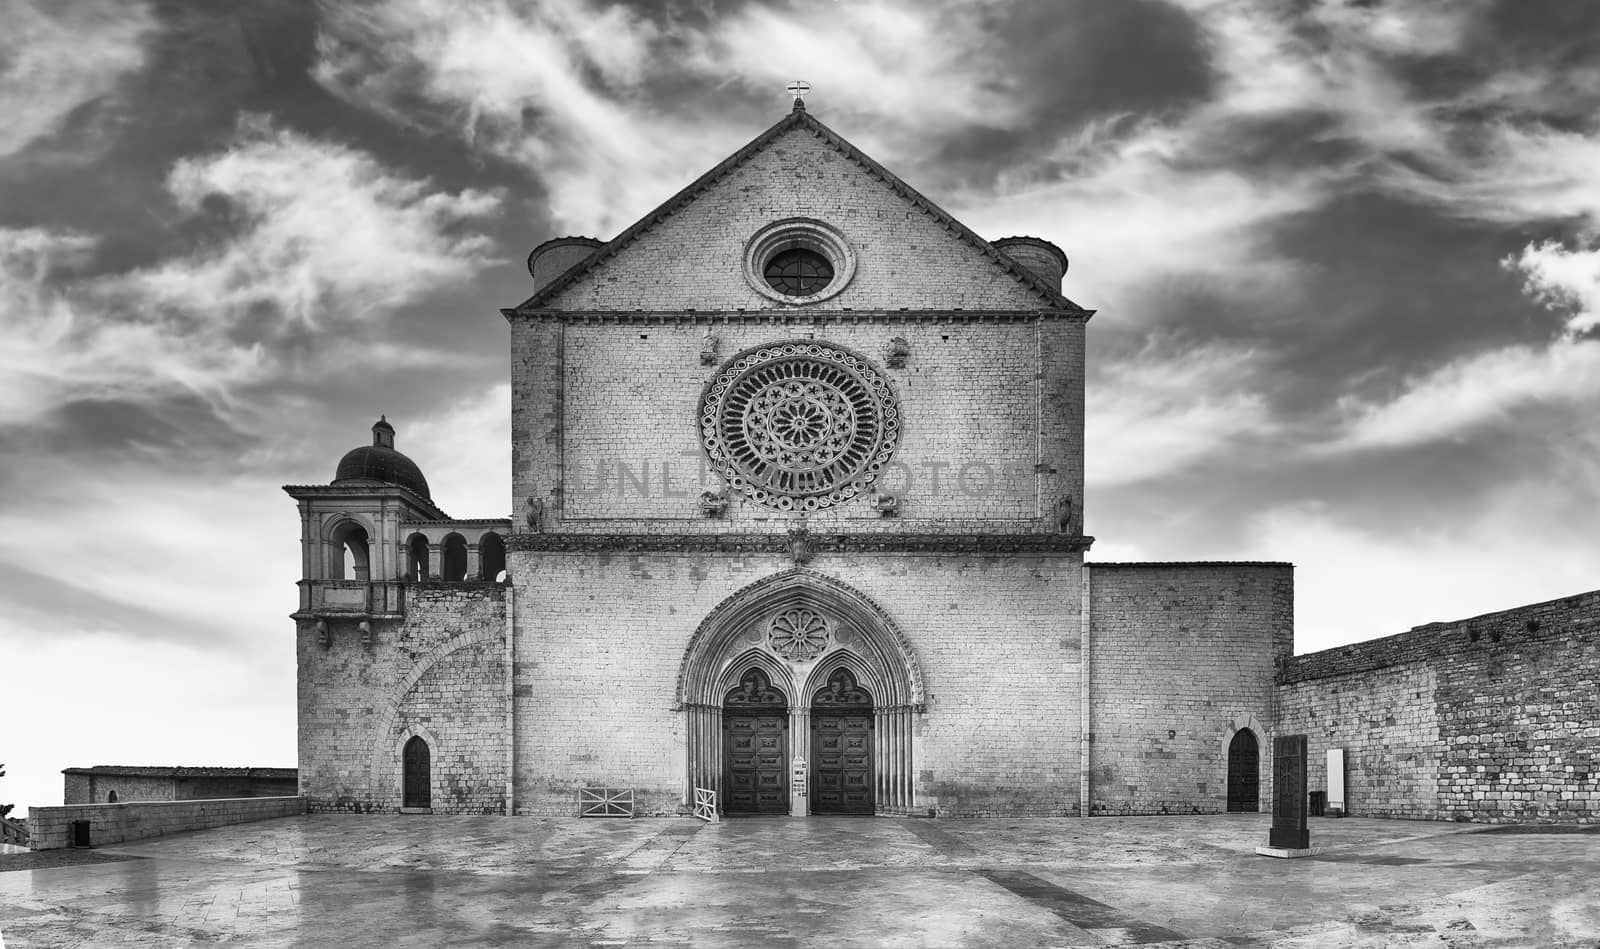 Facade of the Papal Basilica of Saint Francis of Assisi, one of the most important places of Christian pilgrimage in Italy. UNESCO World Heritage Site since 2000